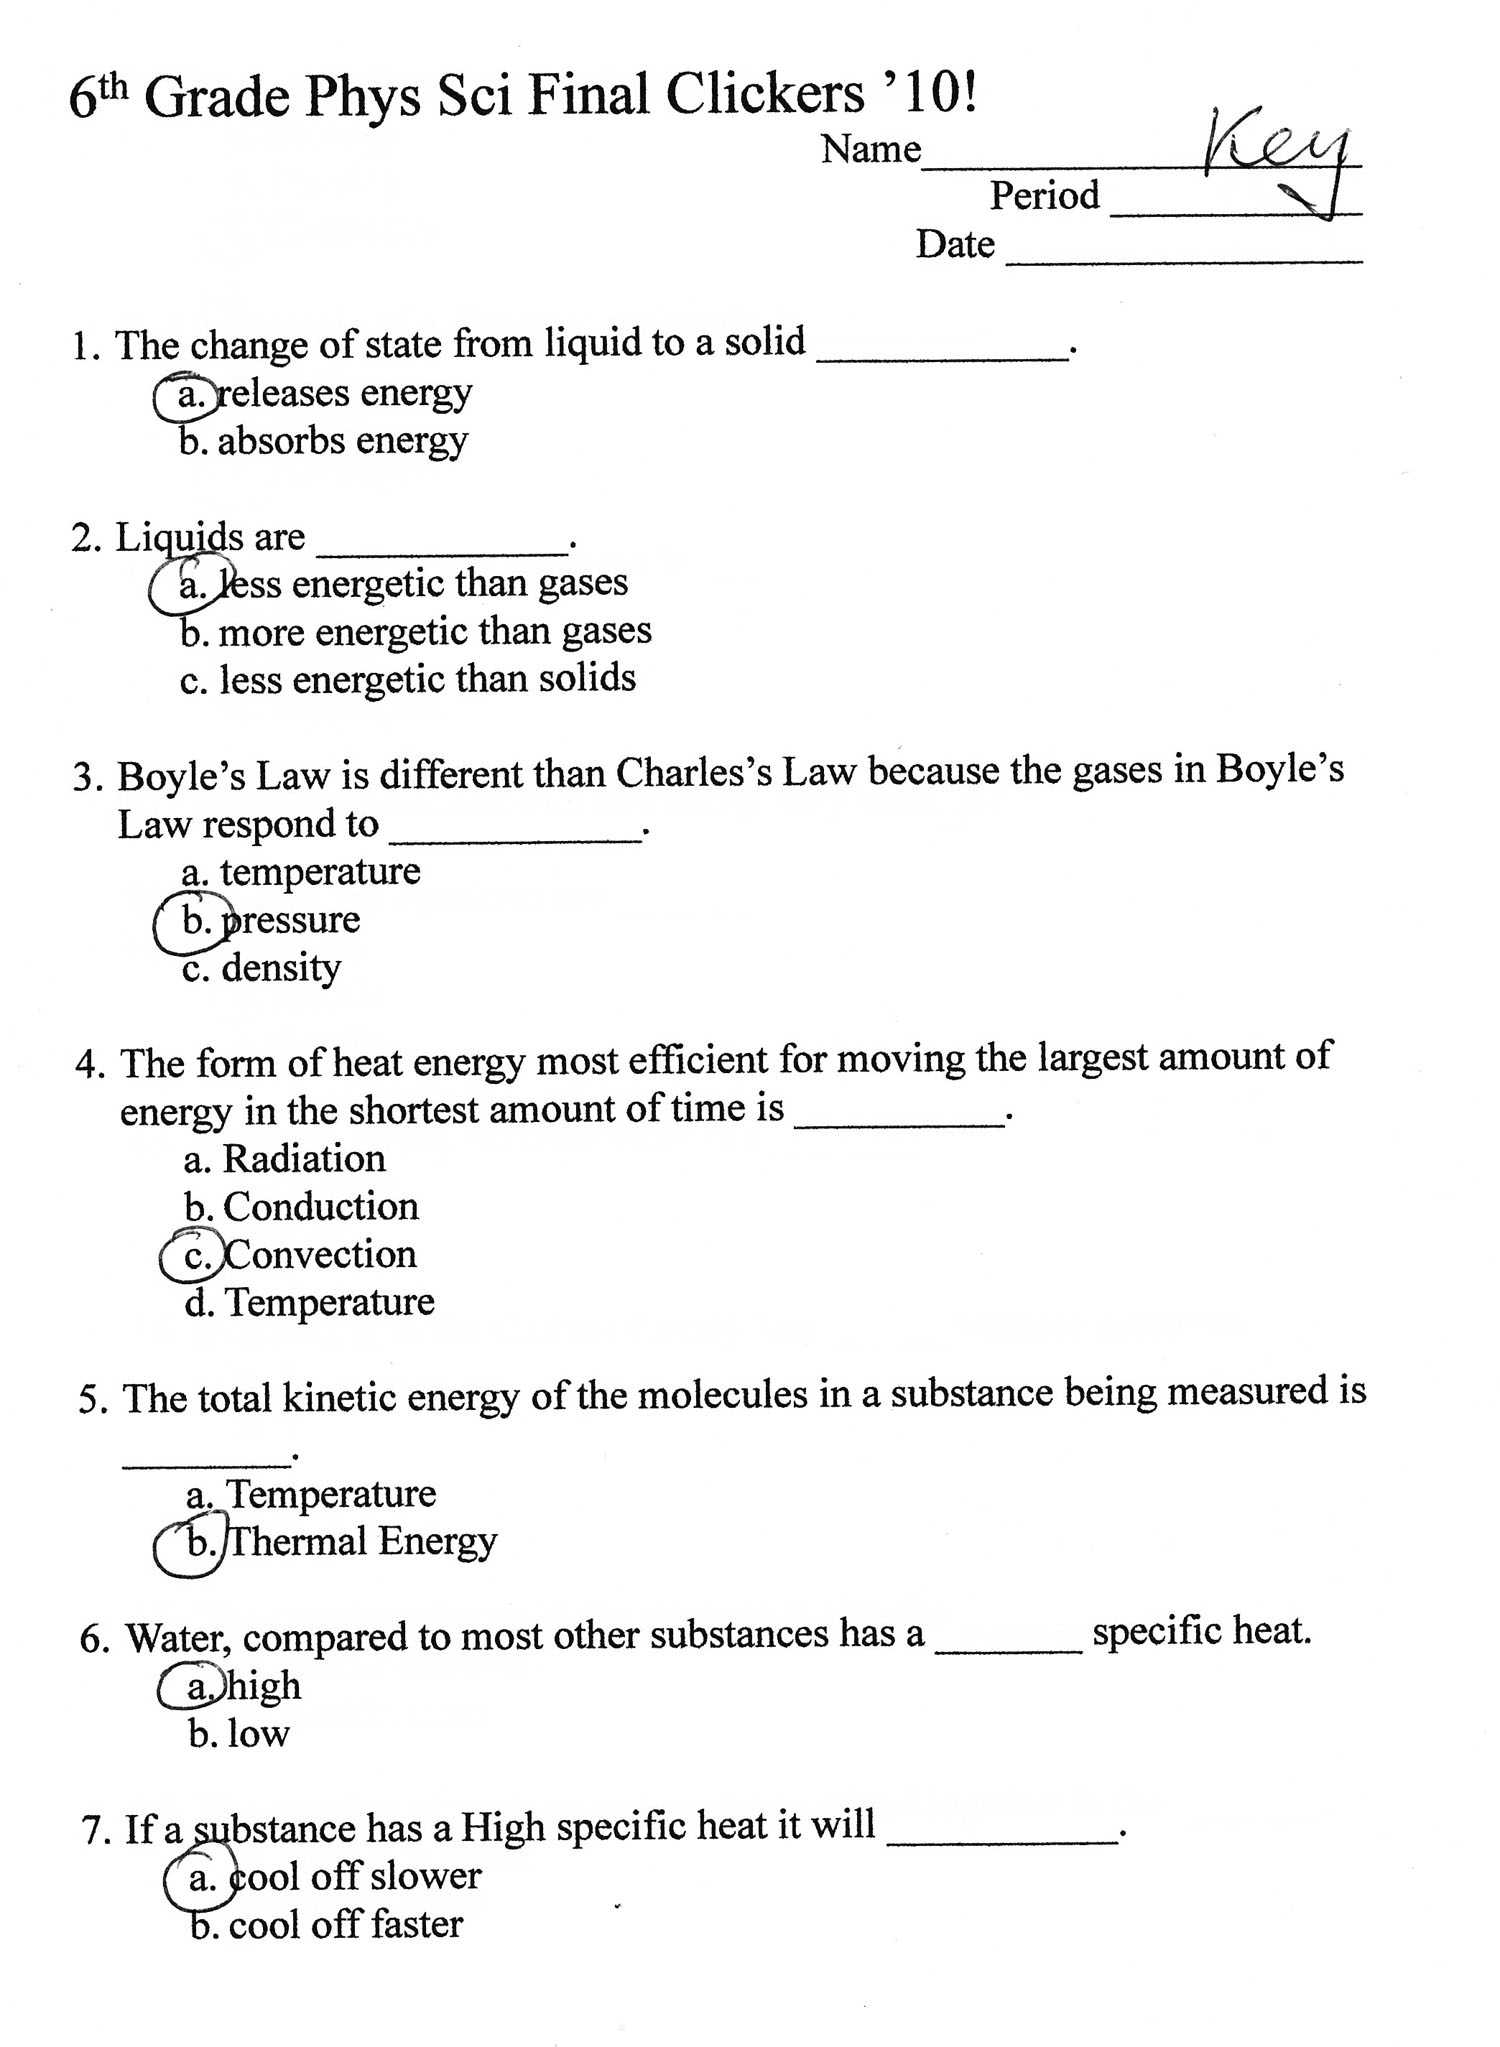 Energy Transfer In the atmosphere Worksheet Answers Also thermal Energy Worksheets D4f A9b Battk